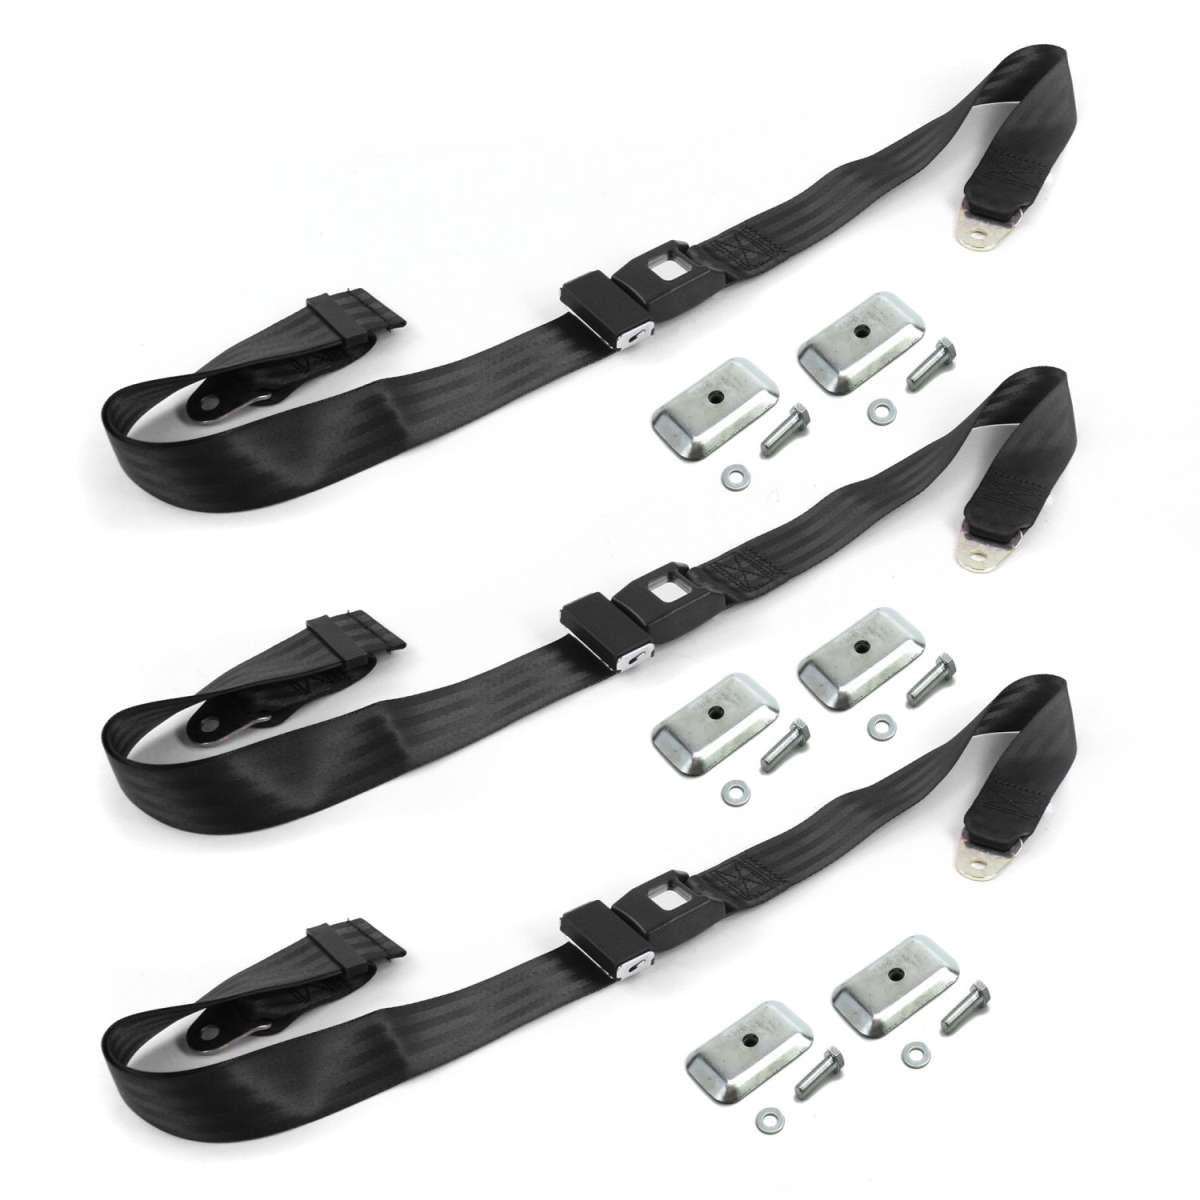 Standard 2 Point Black Lap Bench Seat Belt Kit with Bracketry for Ford Thunderbird 1955-1957 - 3 Belts -  Geared2Golf, GE1565842